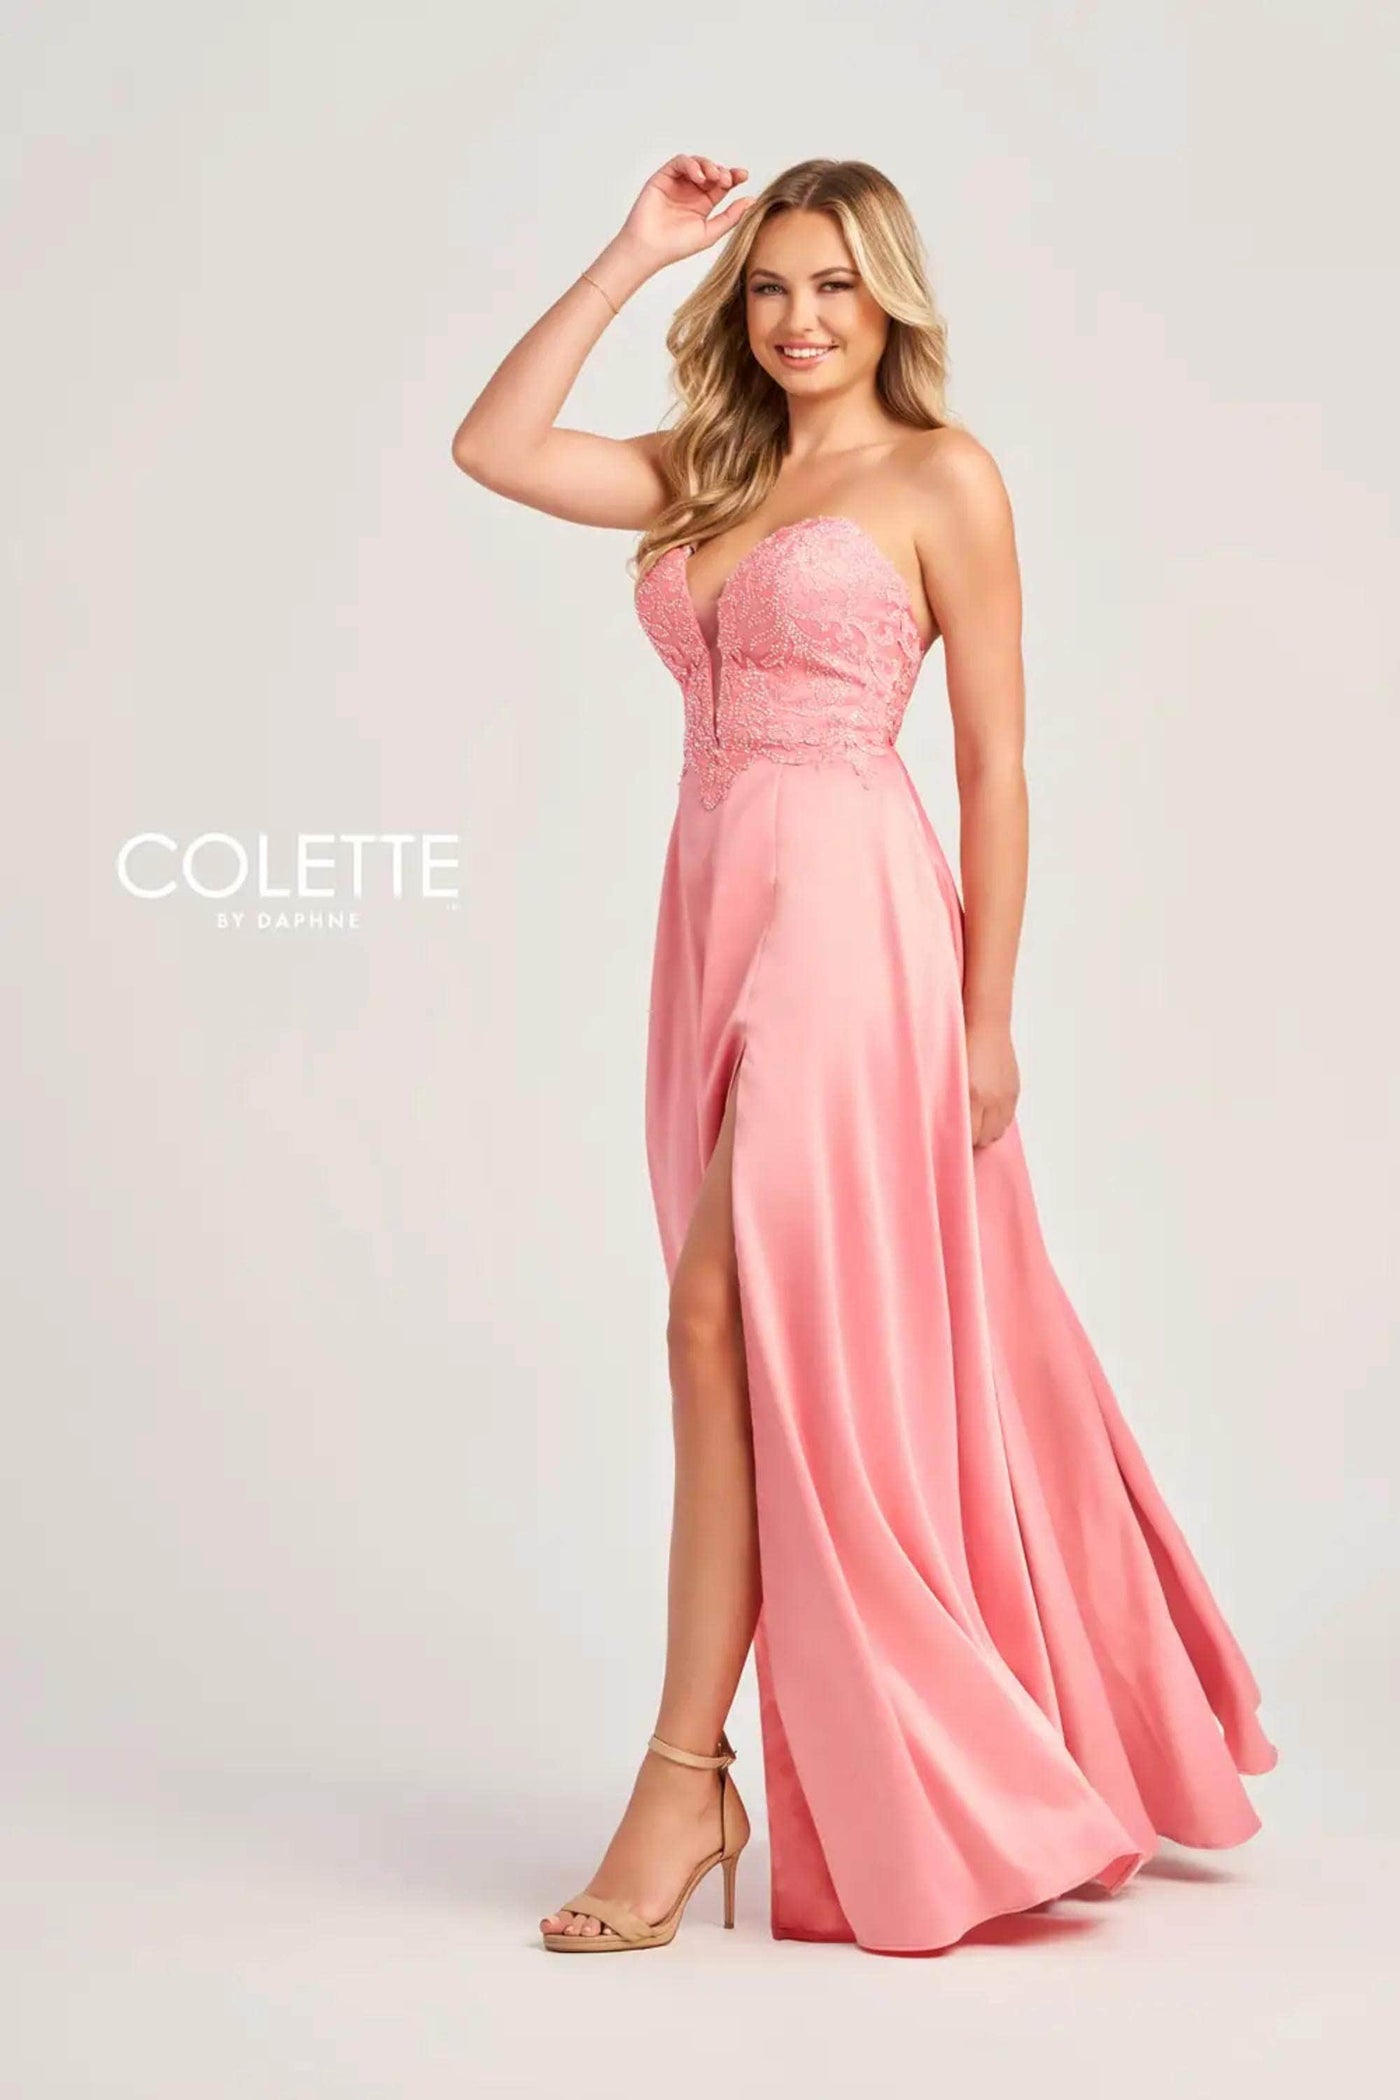 Colette By Daphne CL5142 - Embellished Sweetheart Prom Dress